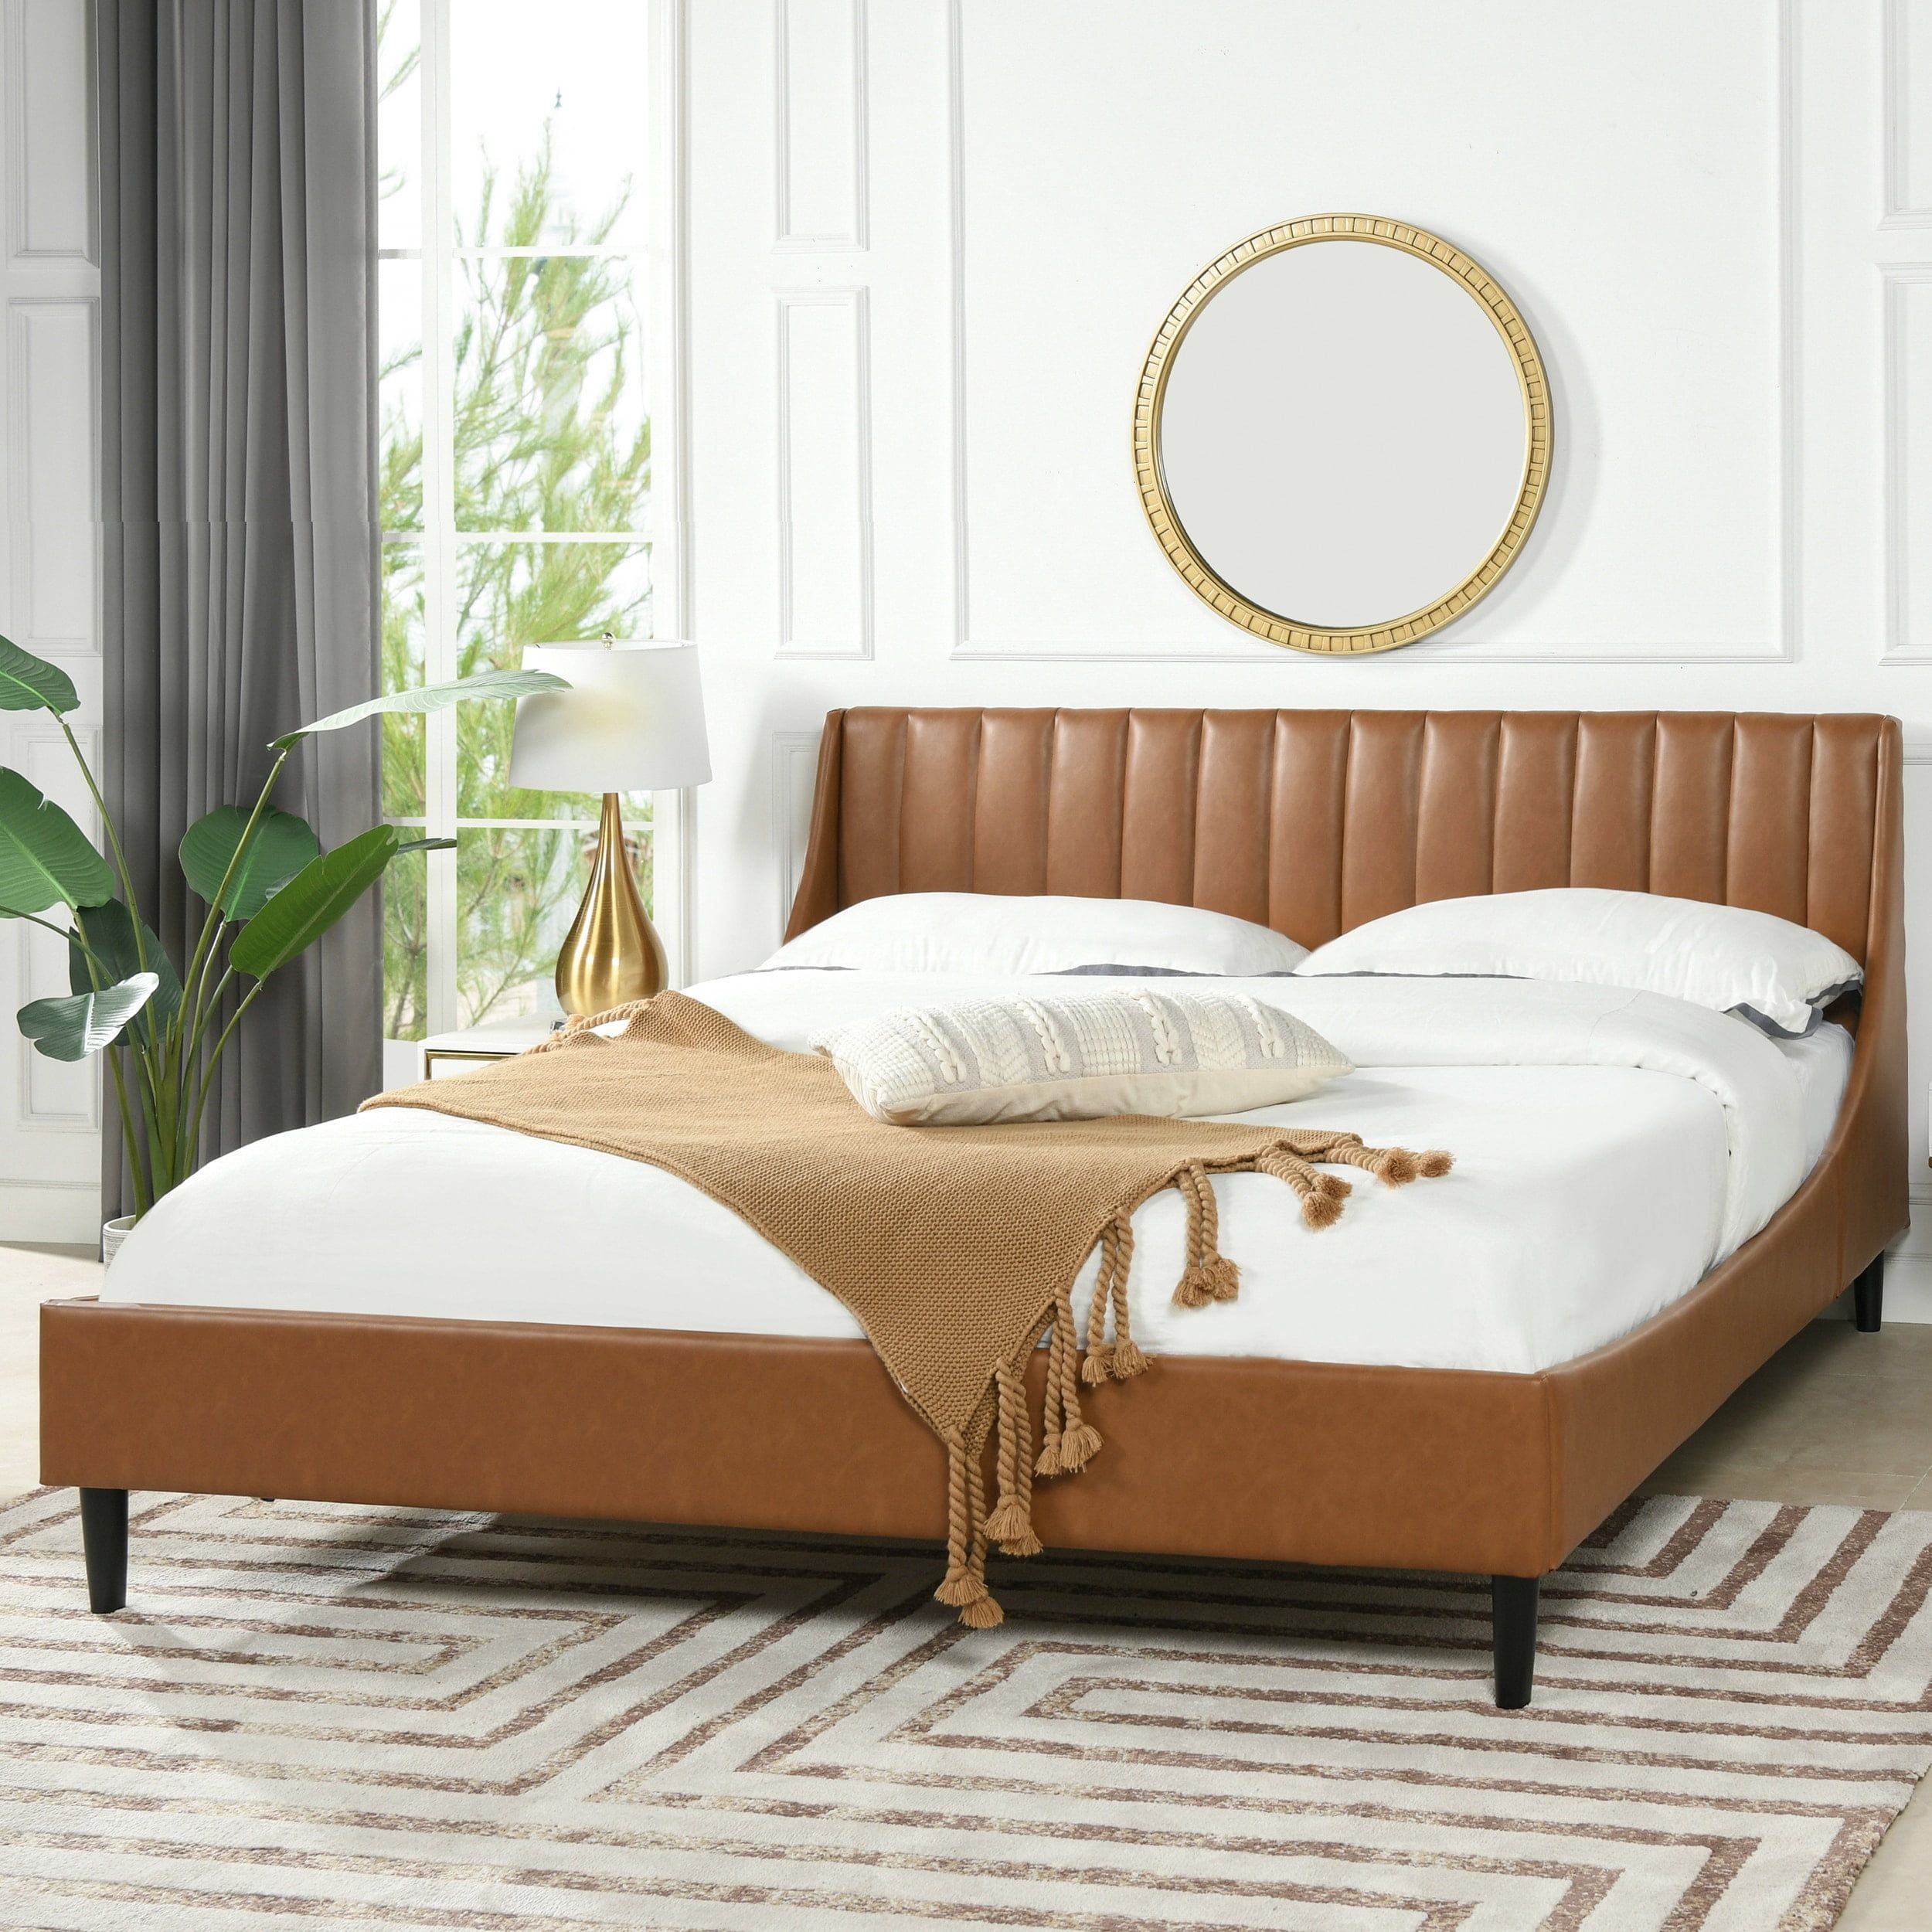 King-Size Caramel Tan Faux Leather Bed with Vertical Tufted Headboard